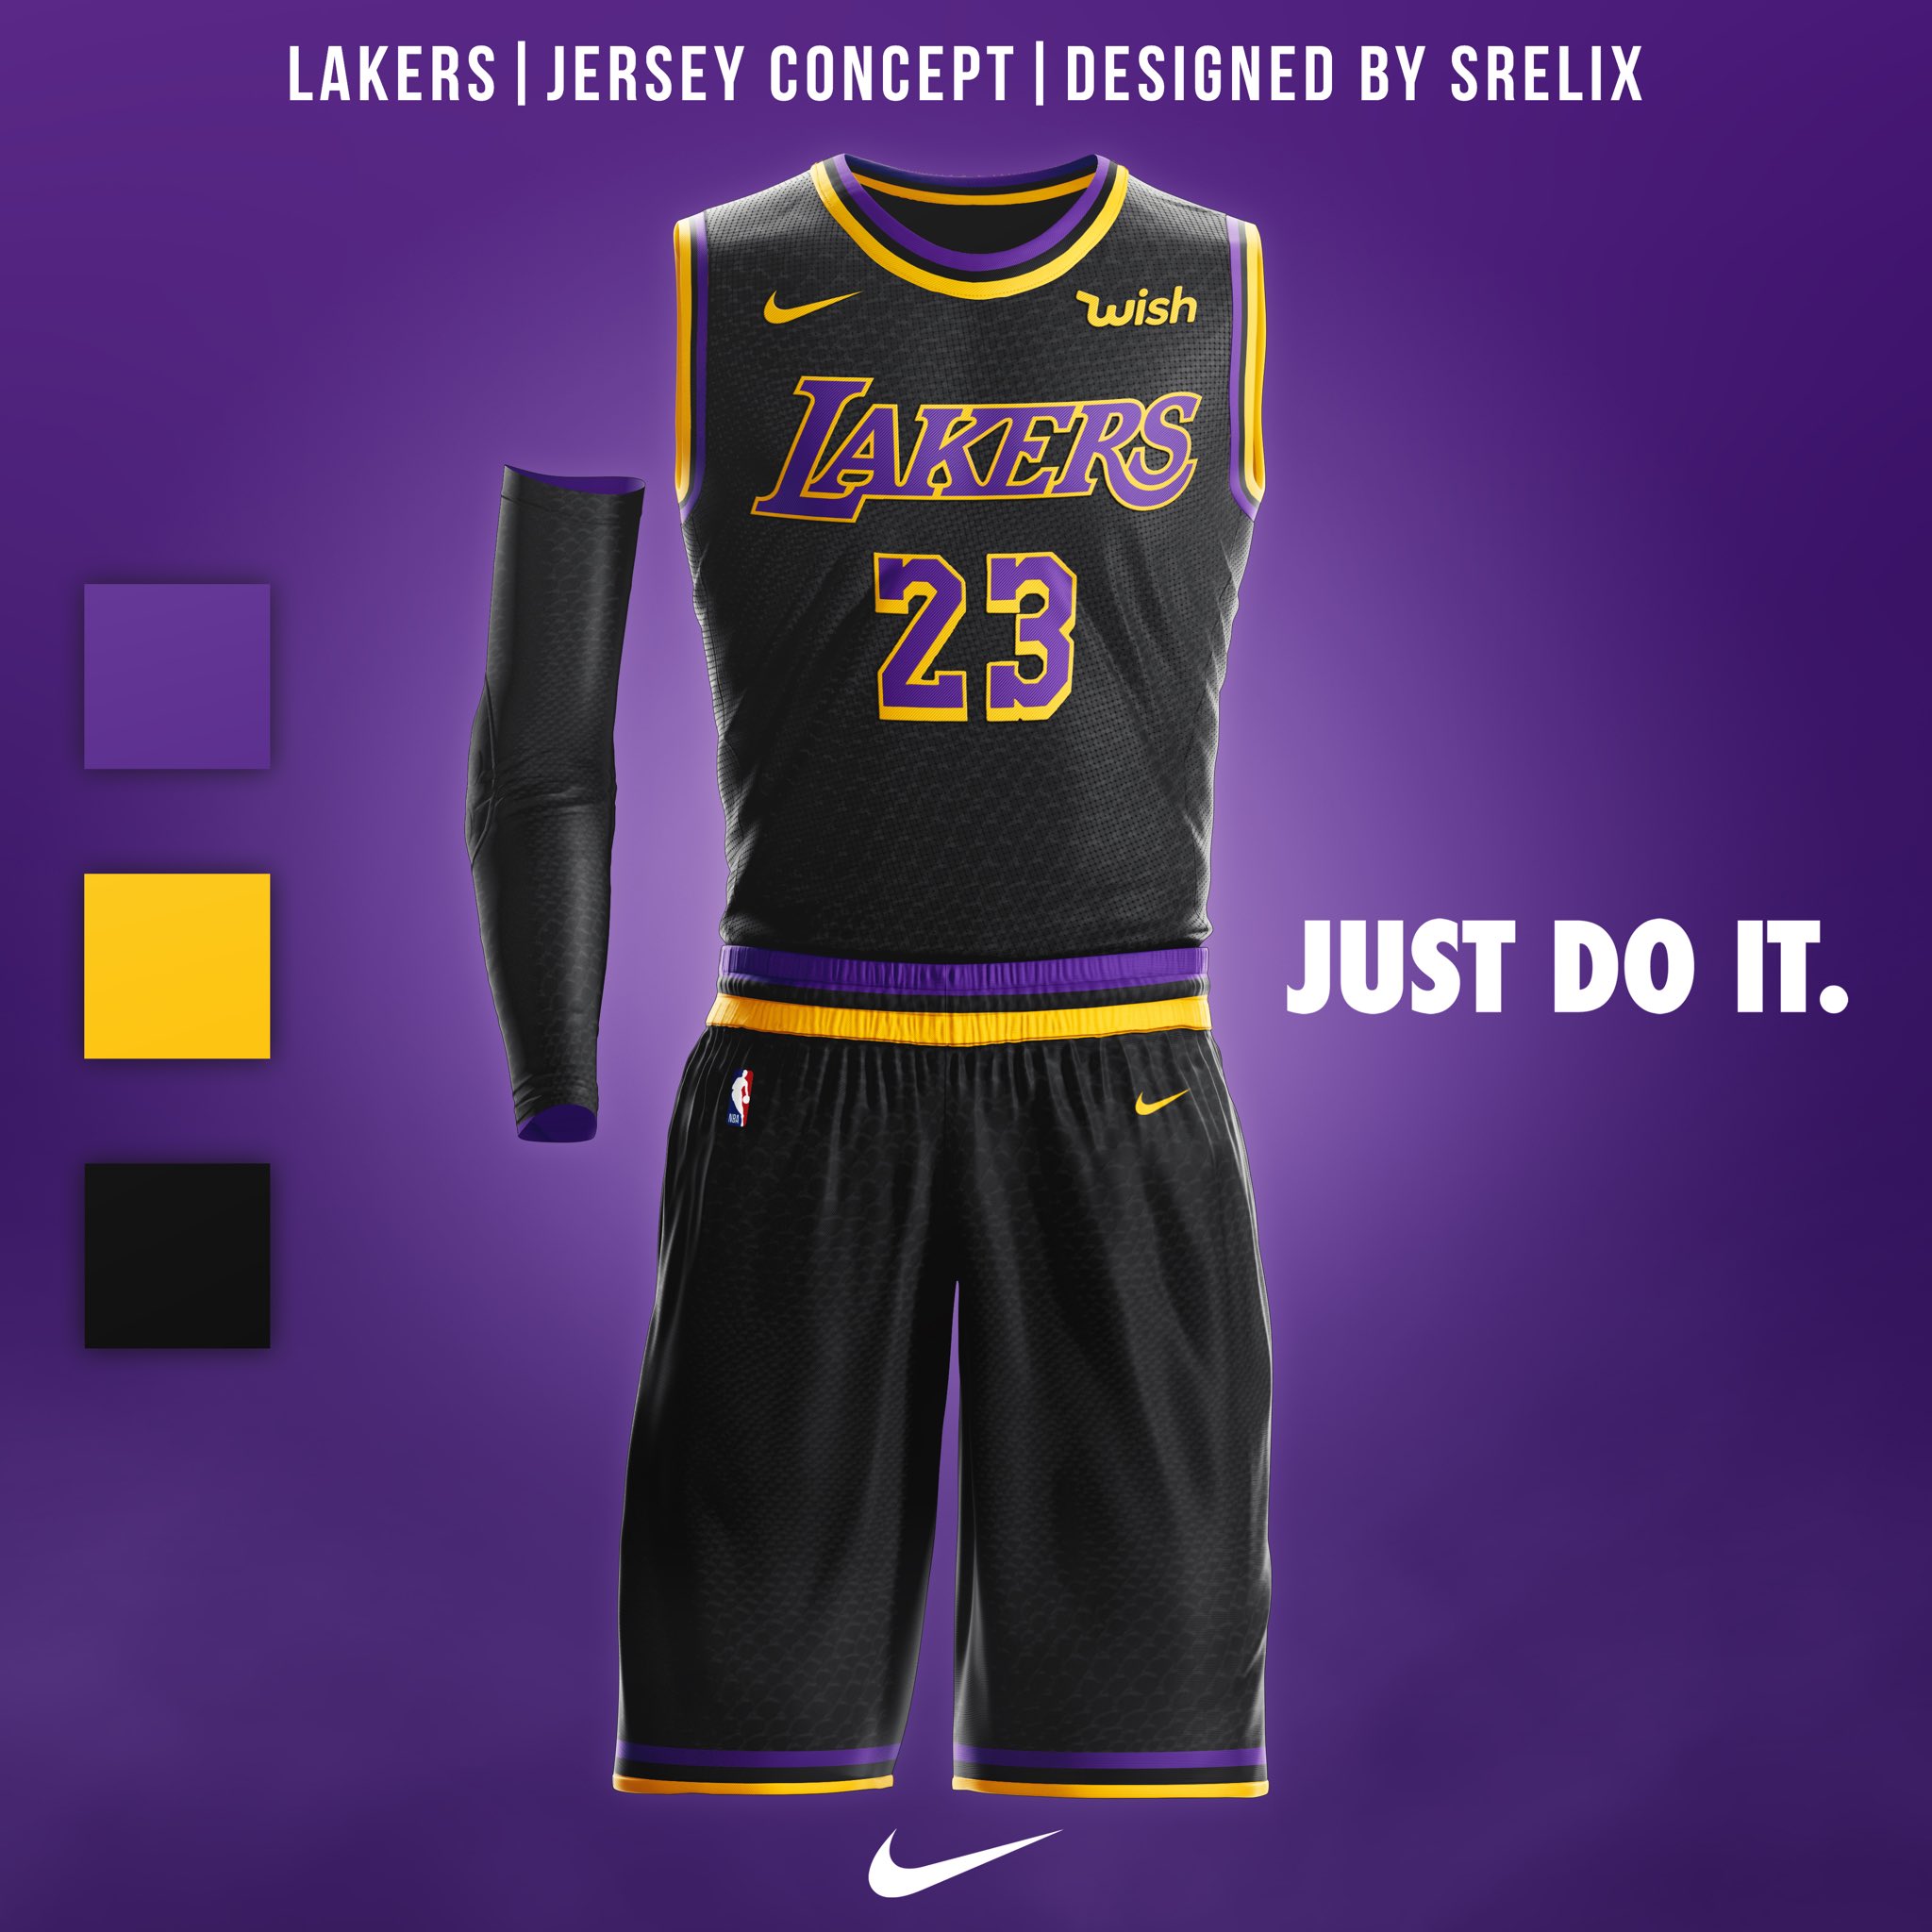 SRELIX Jerseys on Instagram: Was requested to make a reverse